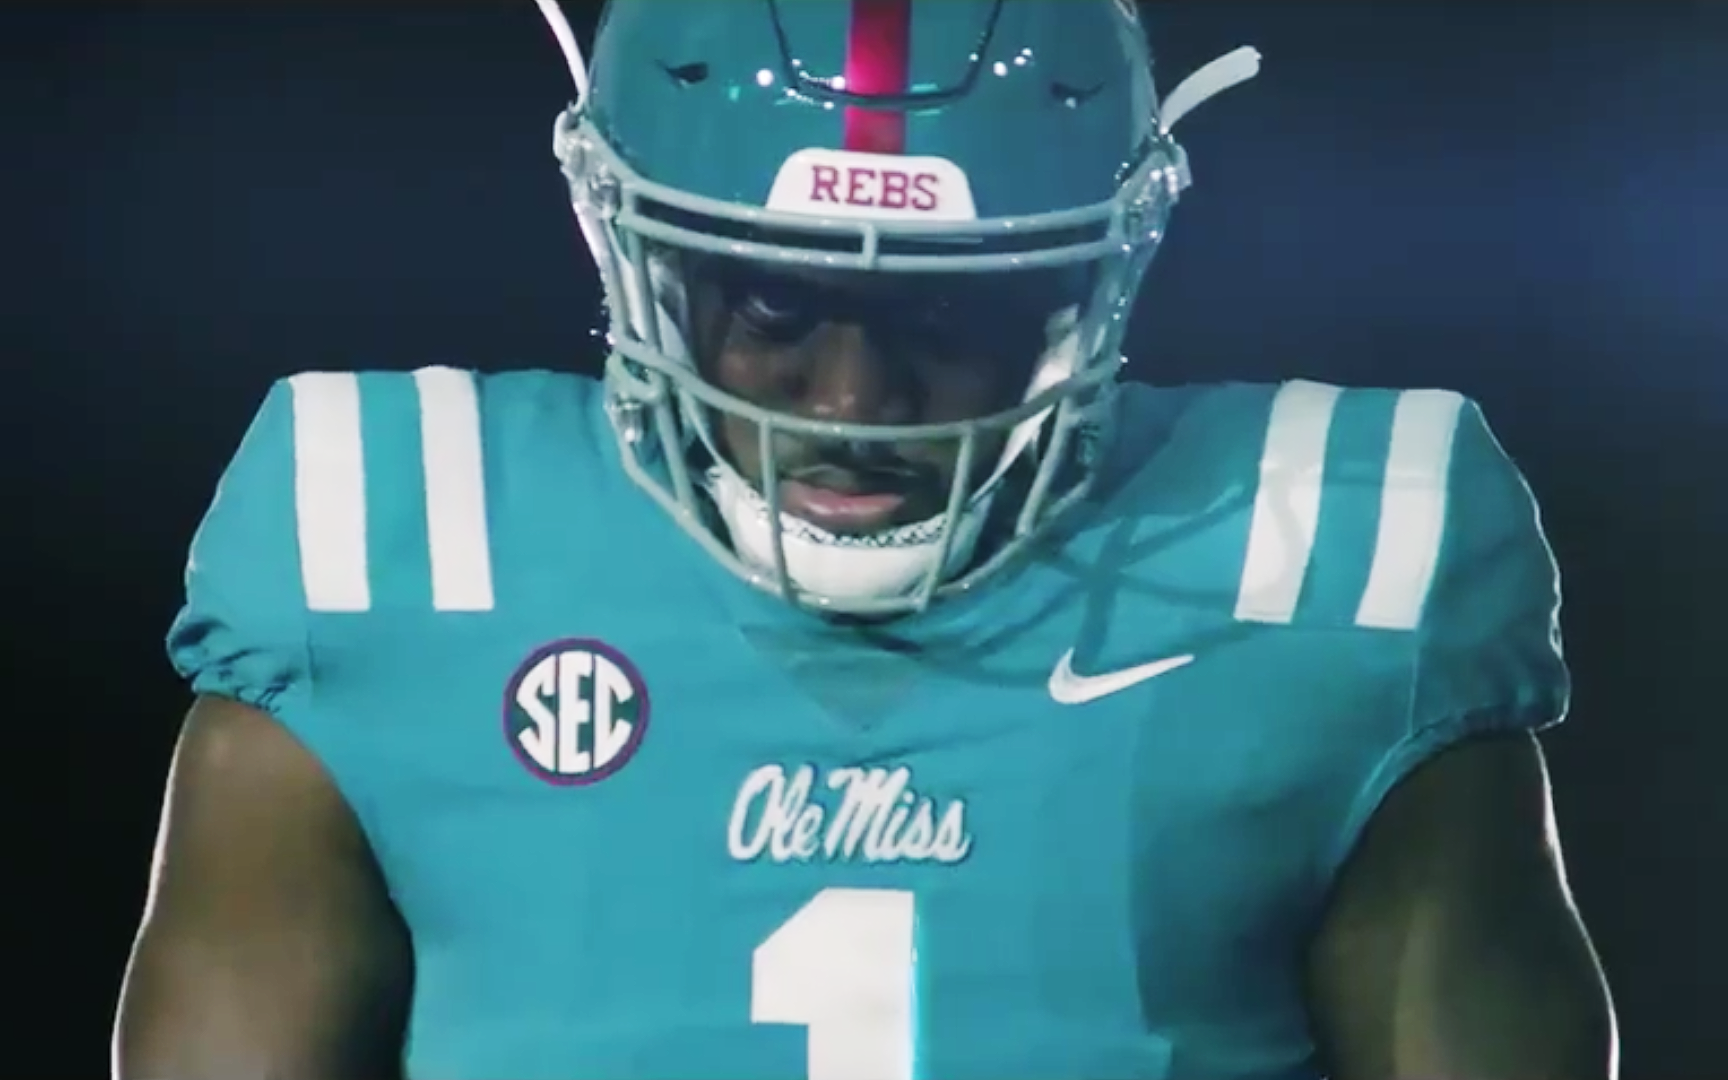 Oh hell yes, Ole Miss is rolling out electric blue uniforms for